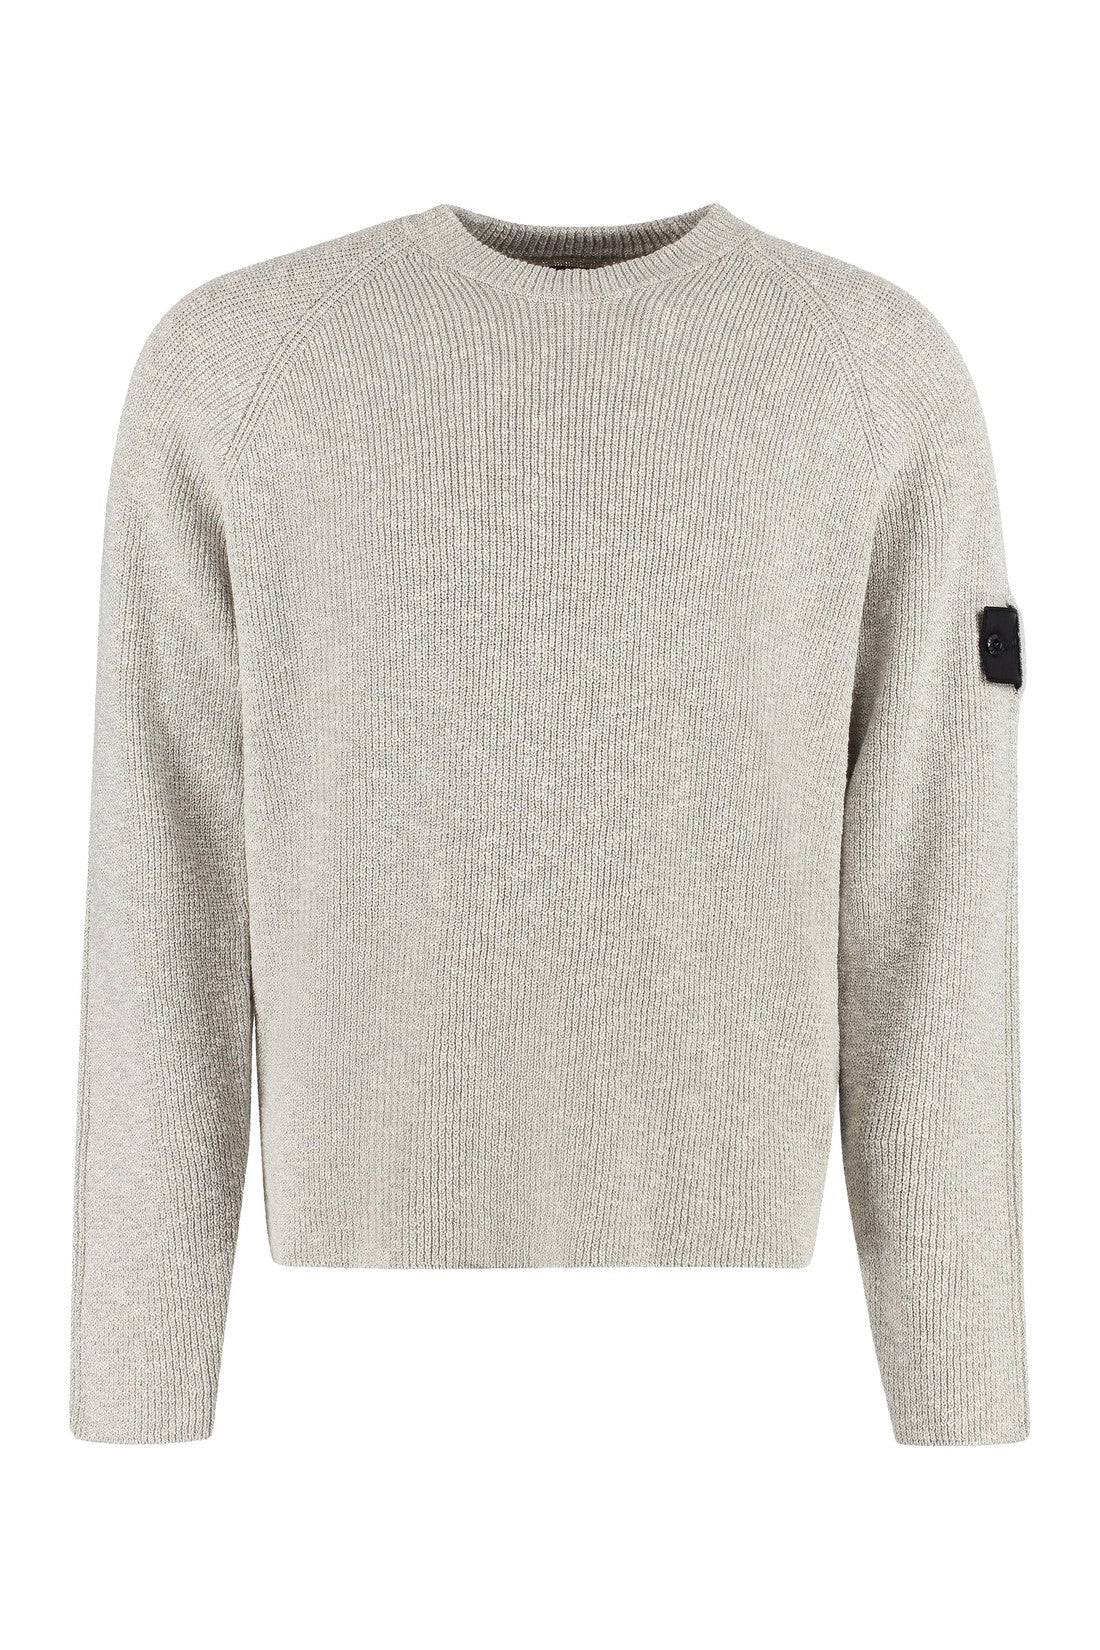 Stone Island Shadow Project-OUTLET-SALE-Long sleeve crew-neck sweater-ARCHIVIST